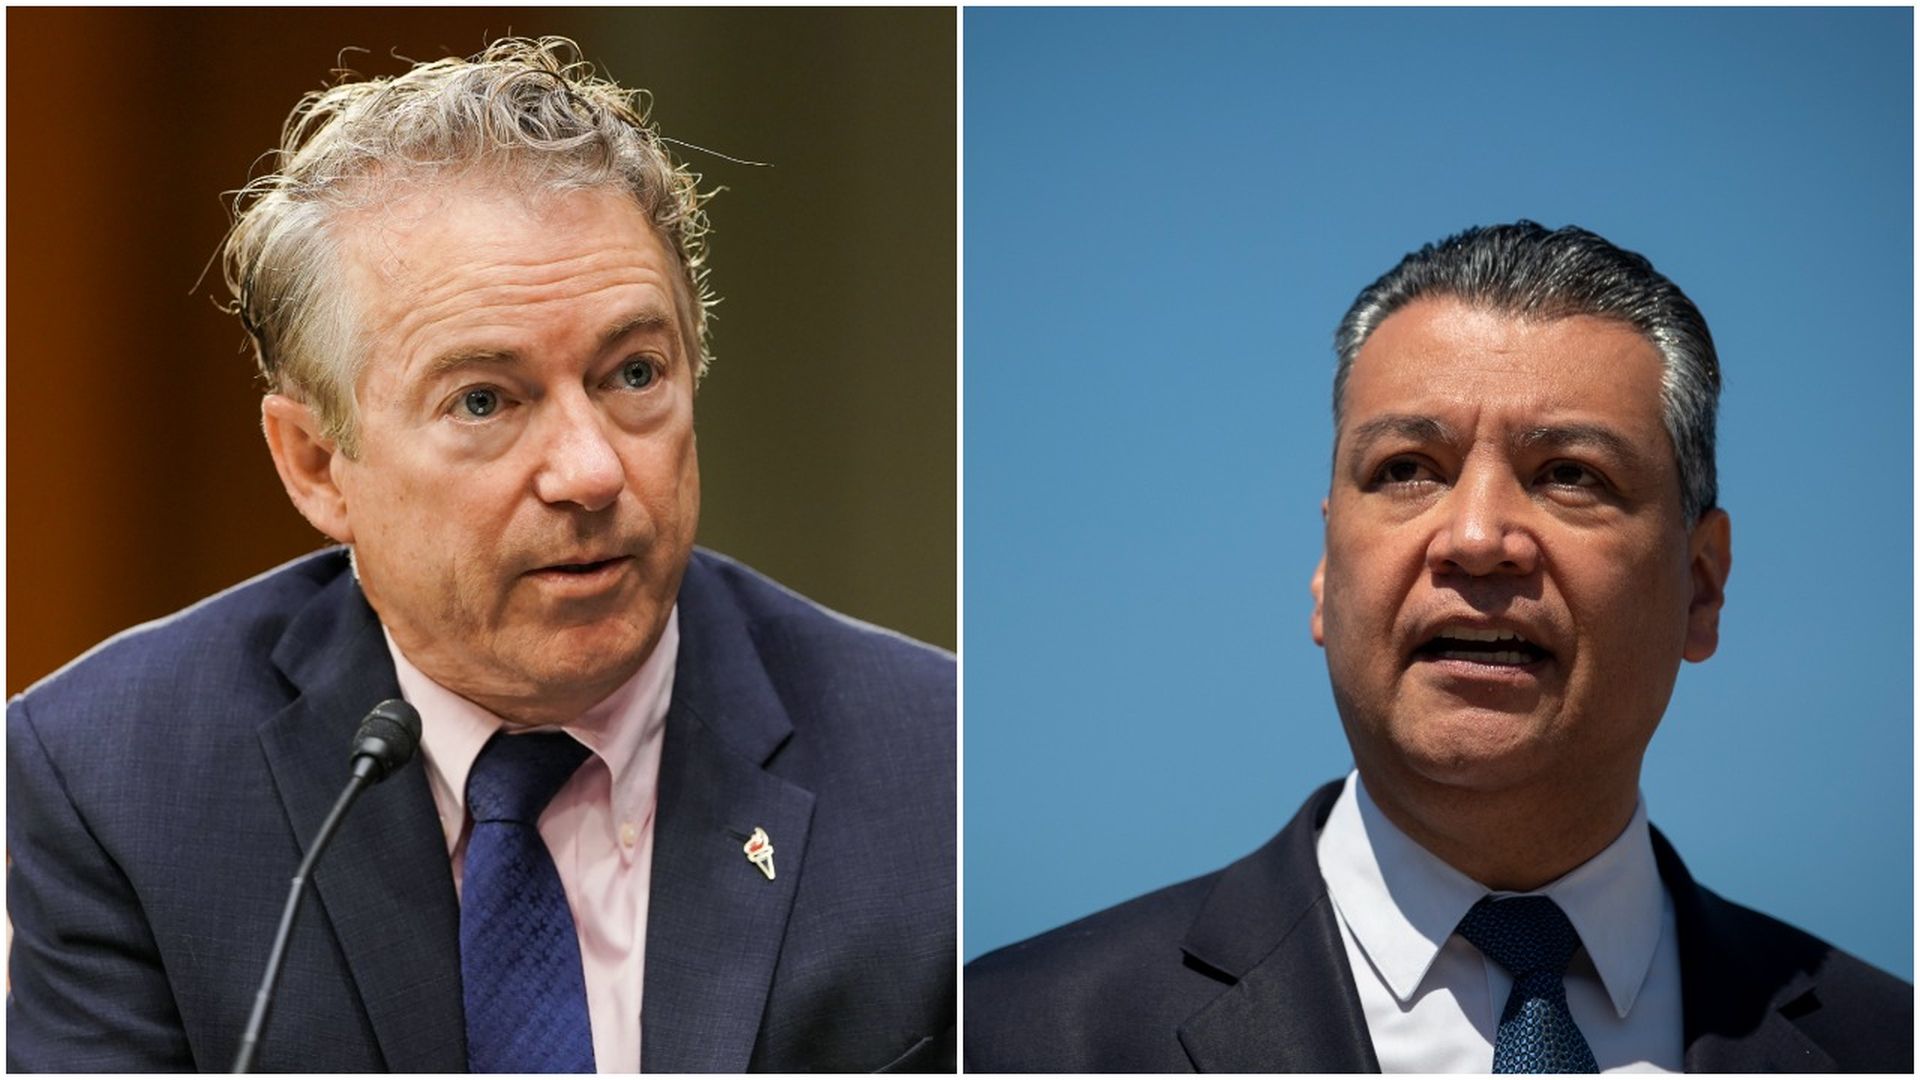 Photo of Rand Paul on the left and Alex Padilla on the right